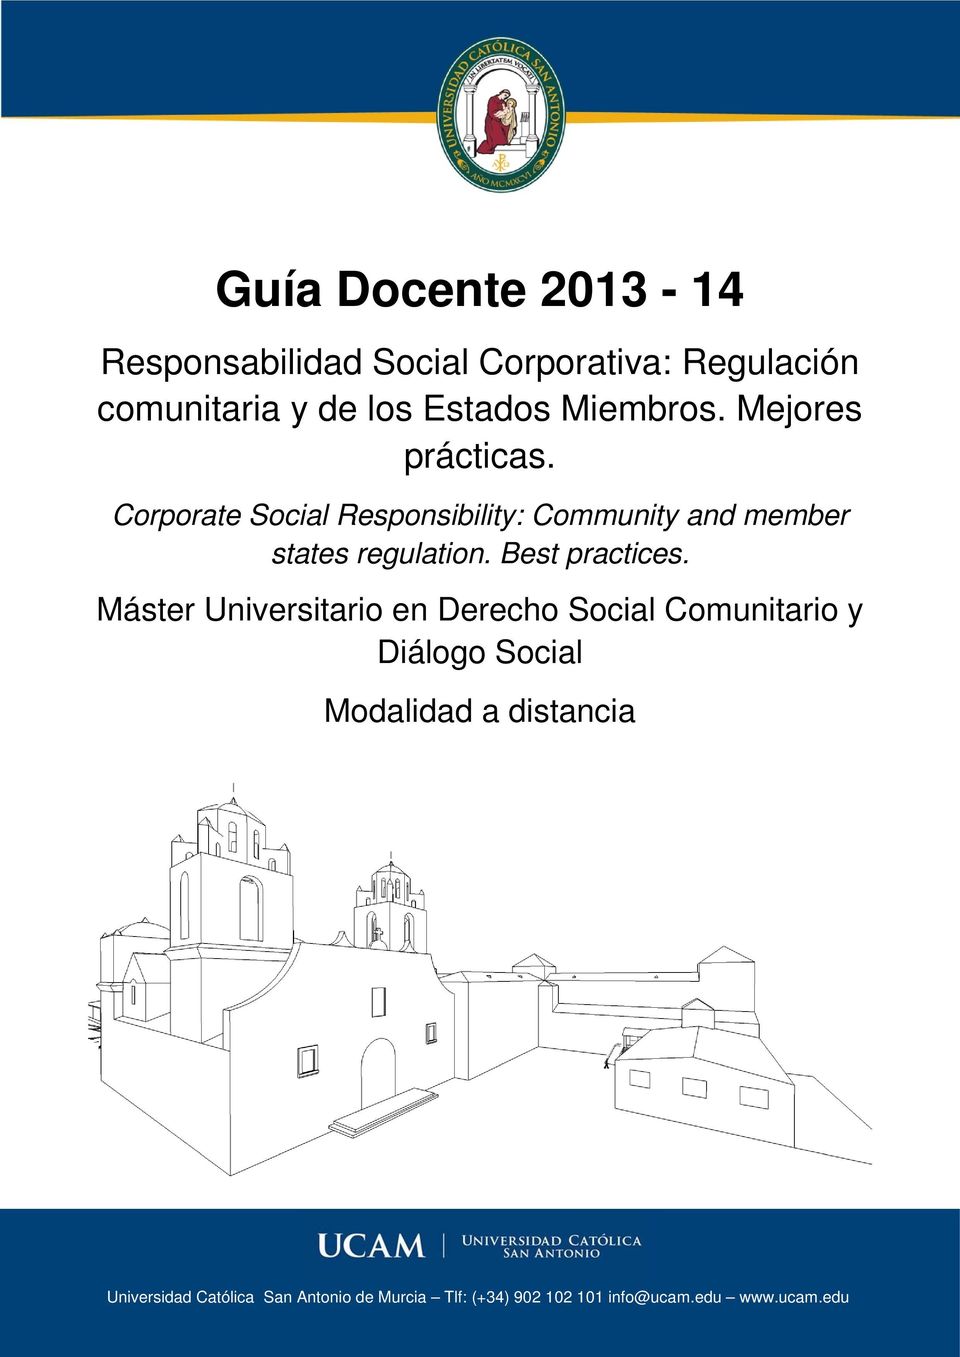 Corporate Social Responsibility: Community and member states regulation. Best practices.